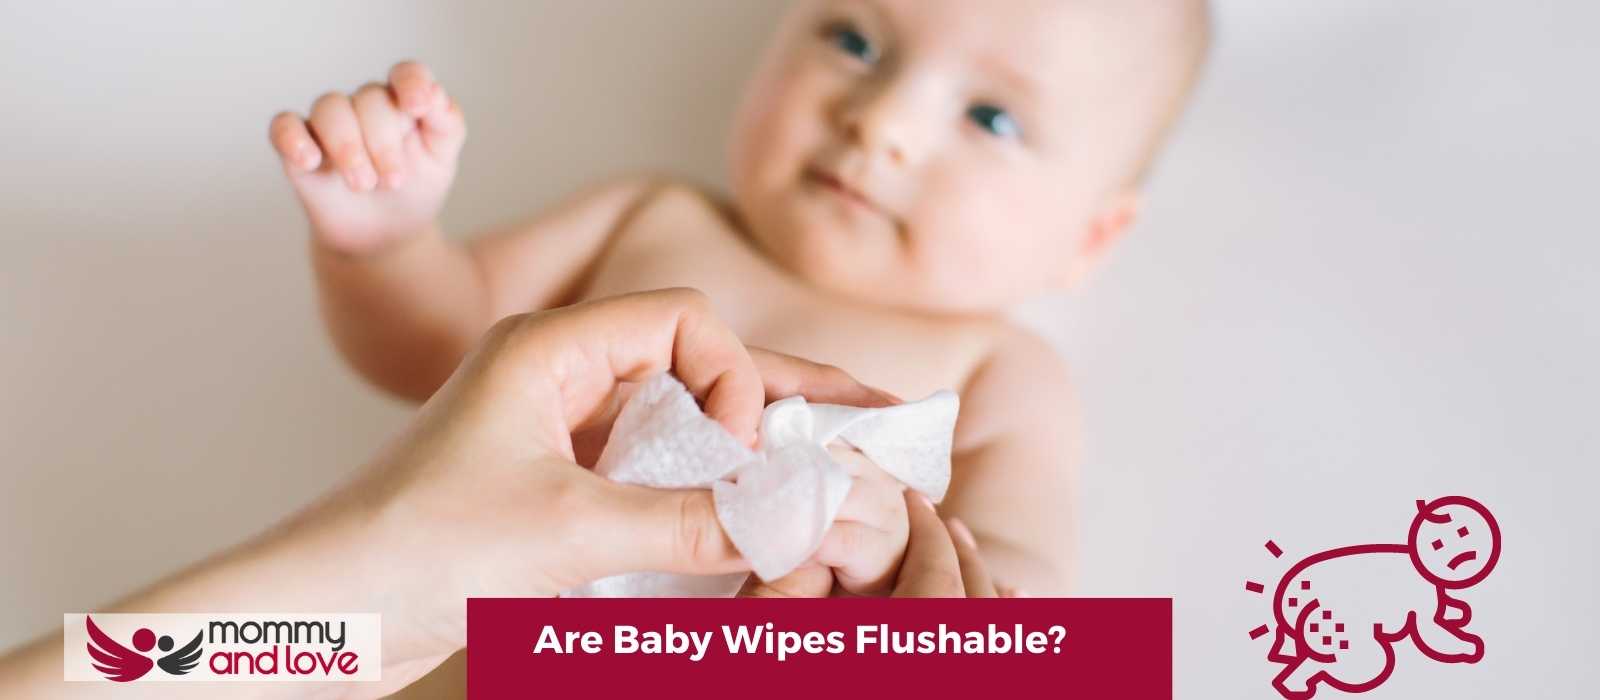 Are Baby Wipes Flushable?